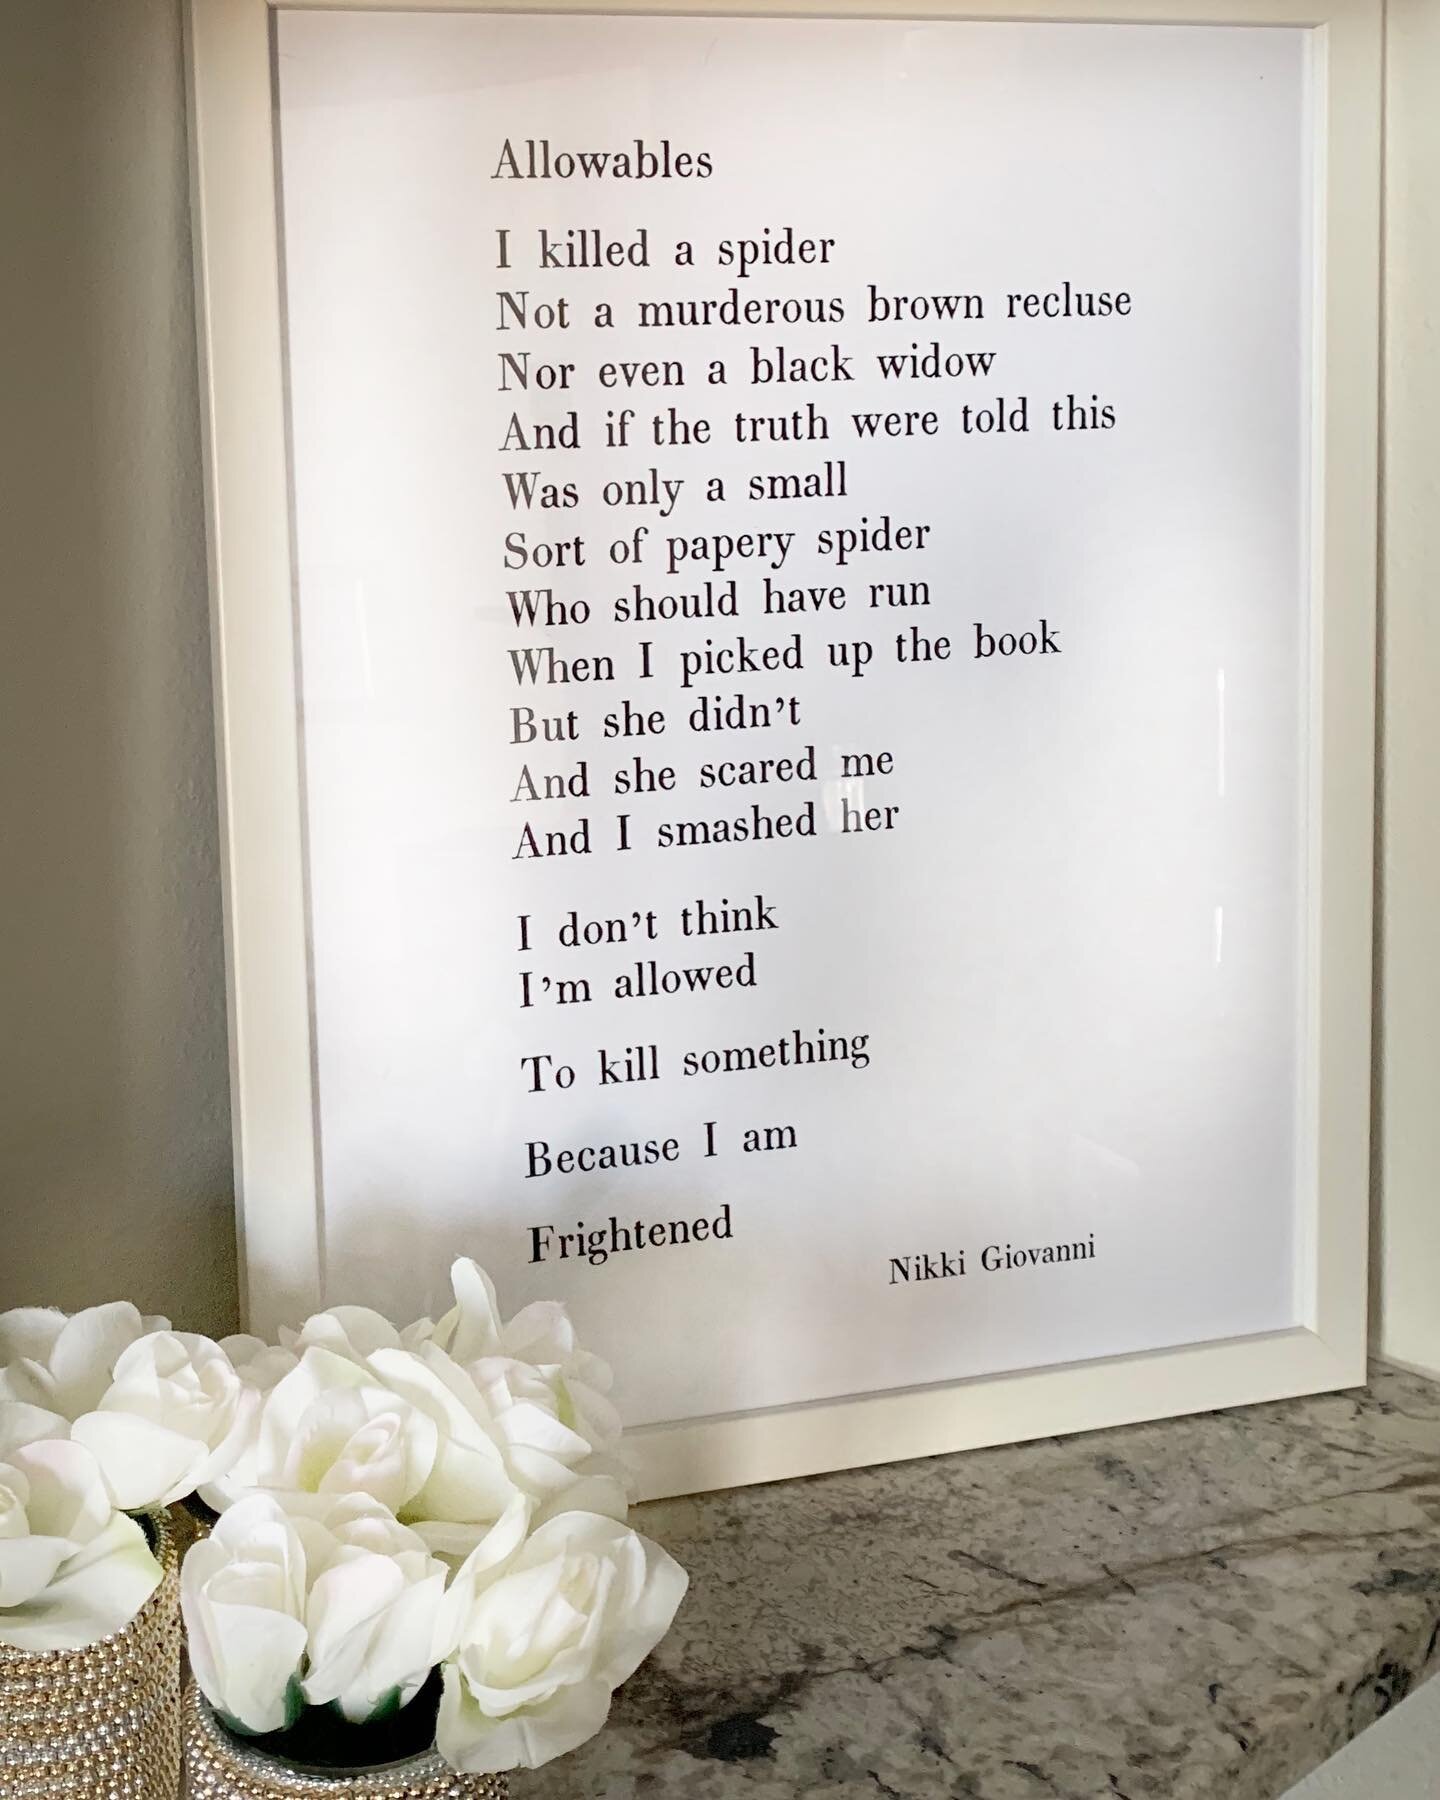 Framed words to live by. 

Thank you @rebekah.skelton for sharing this poem with me.